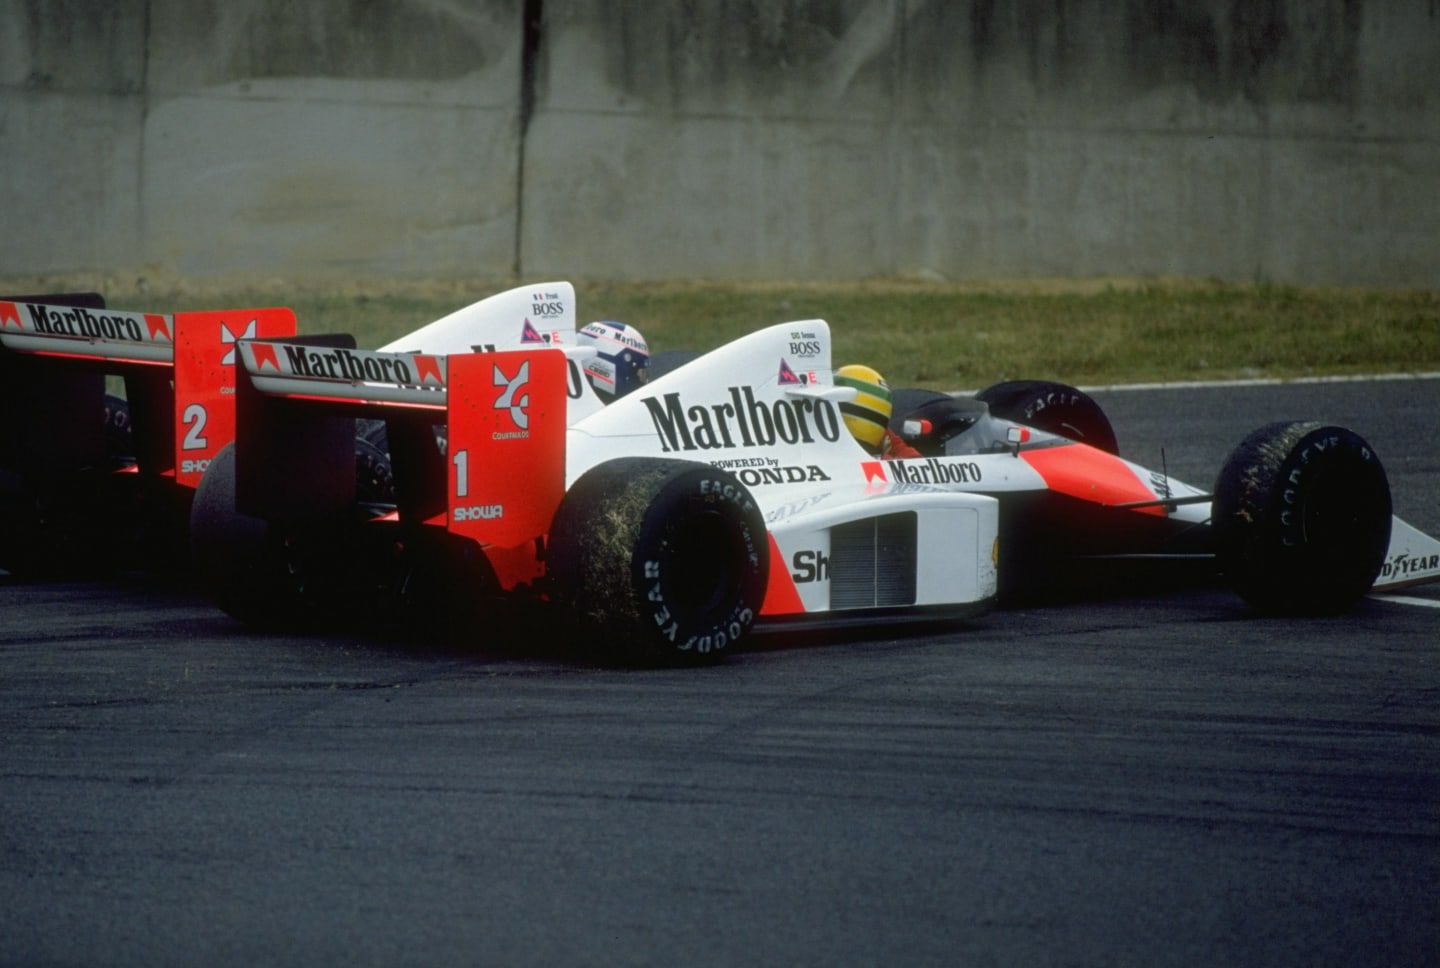 1989:  Alain Prost of France and Ayrton Senna of Brazil collide in their McLaren Hondas during the